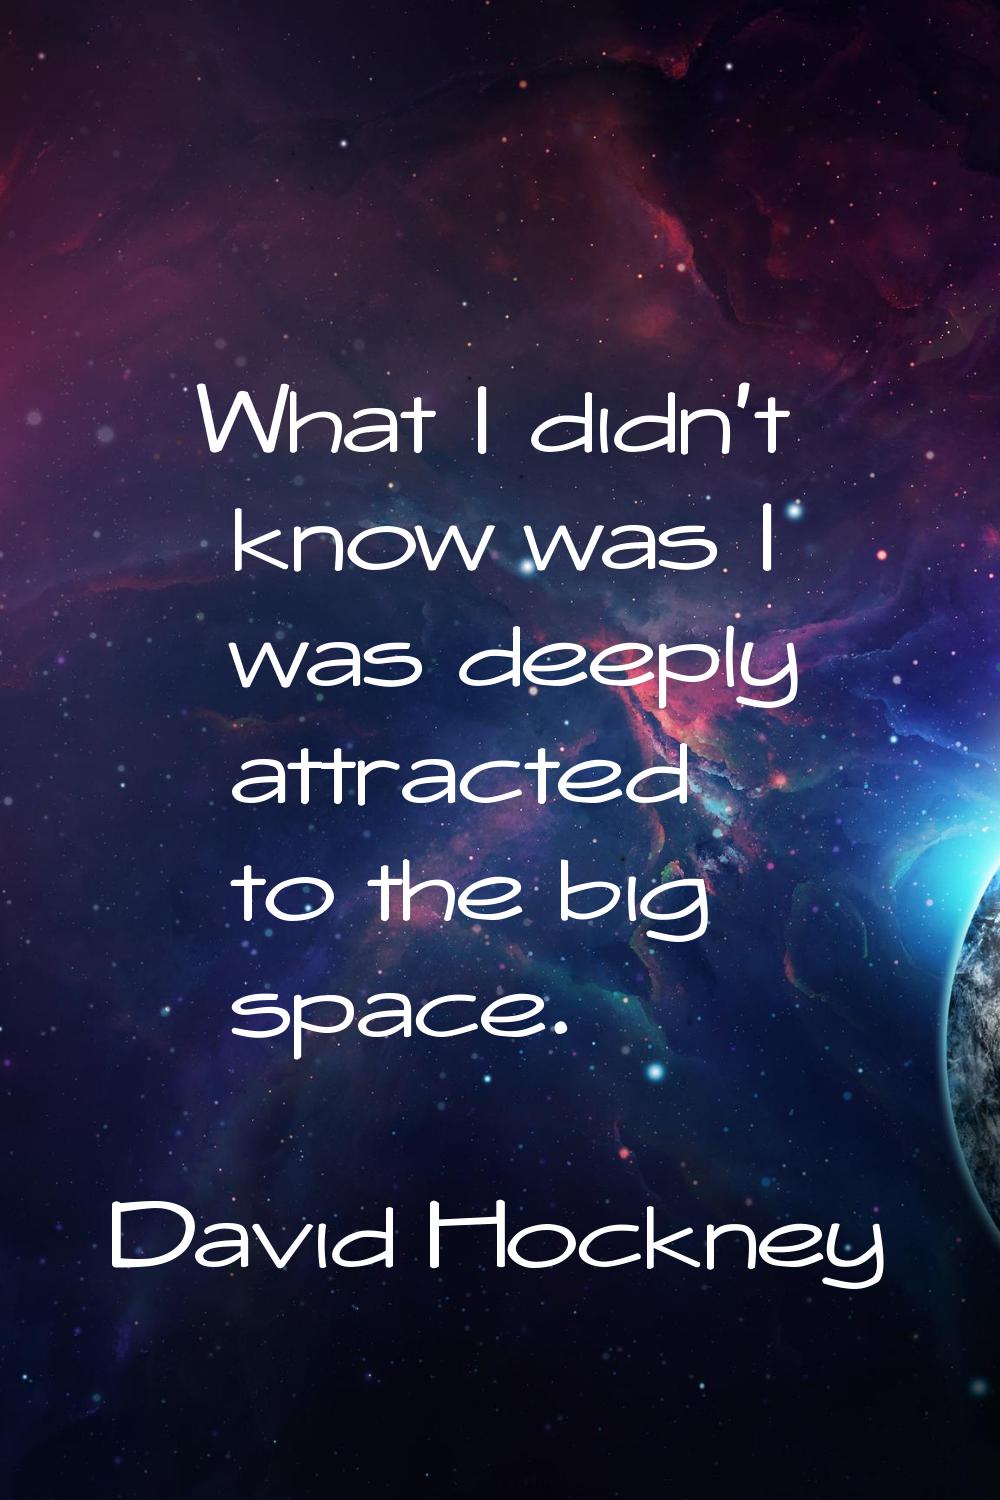 What I didn't know was I was deeply attracted to the big space.